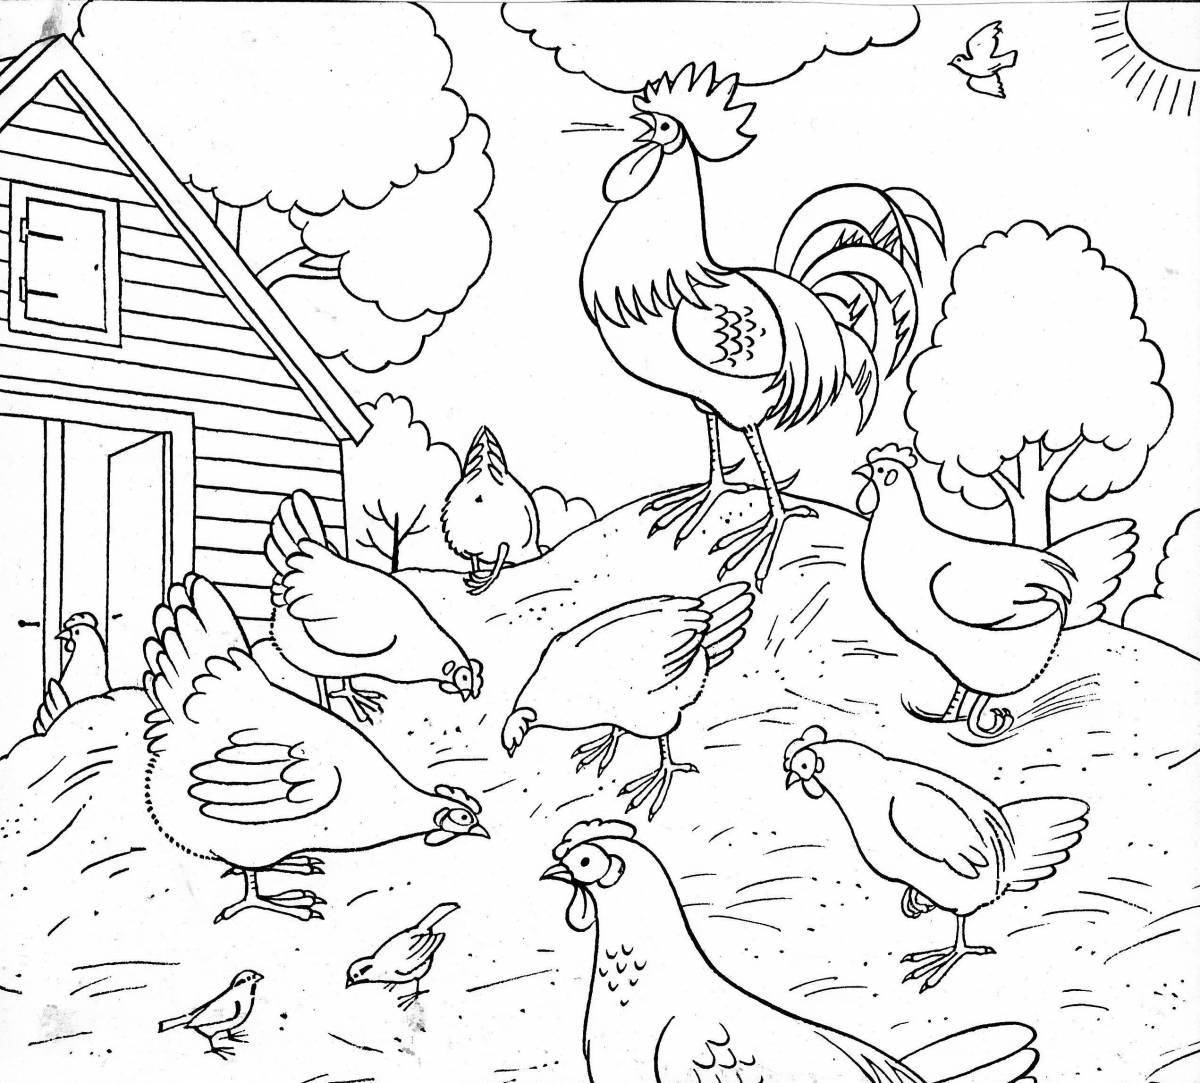 Coloring picturesque barnyard